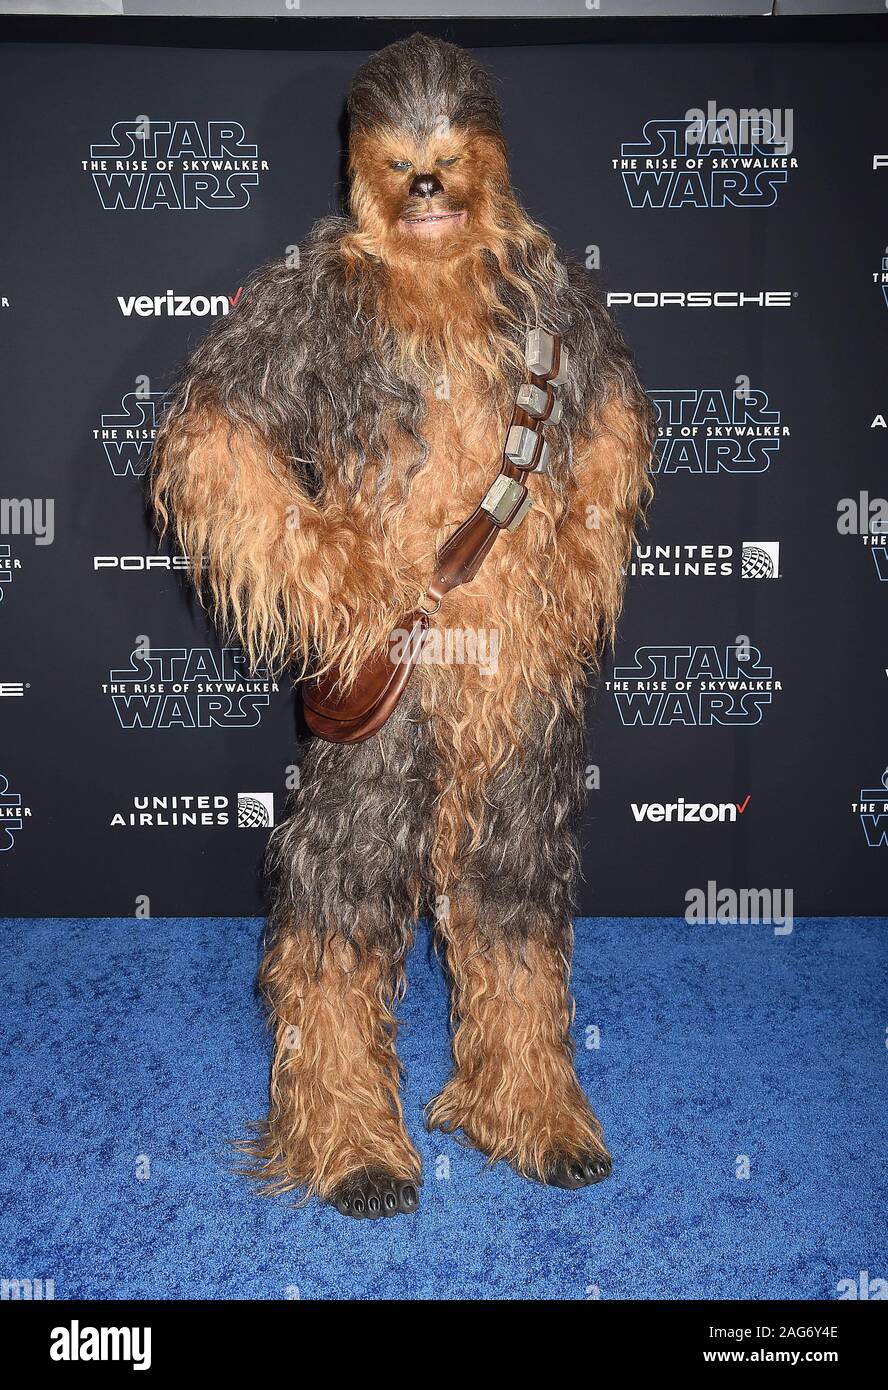 HOLLYWOOD, CA - DECEMBER 16: Chewbacca attends the Premiere of Disney's "Star Wars: The Rise Of Skywalker" at the El Capitan Theatre on December 16, 2019 in Hollywood, California. Stock Photo